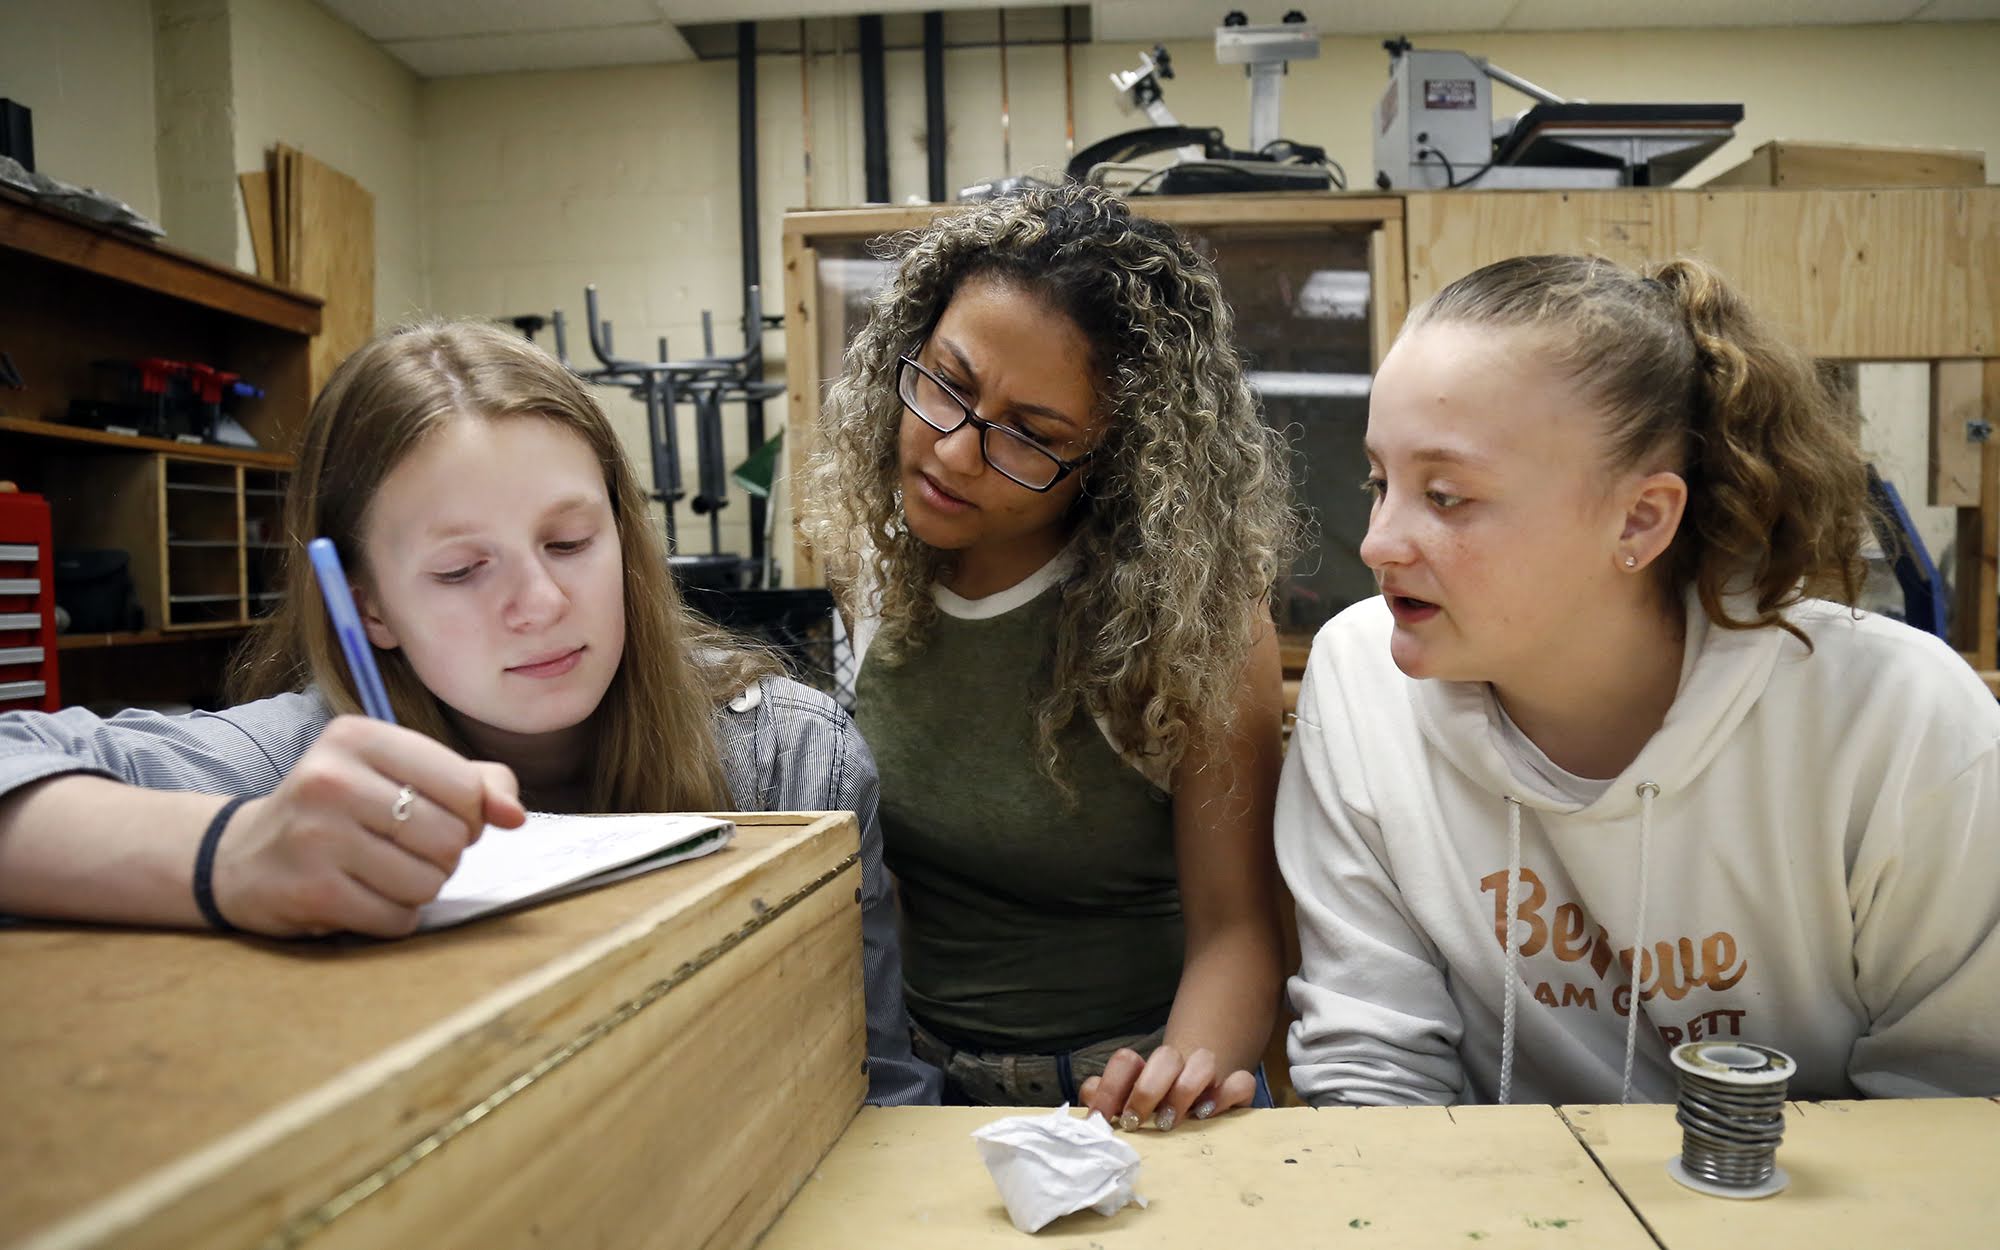 In May, Clairton Middle/High School student Lauren Weatherspoon (center) worked with classmates Abigail McGee (left) and Wendy Florenz (right) during a robotics class.